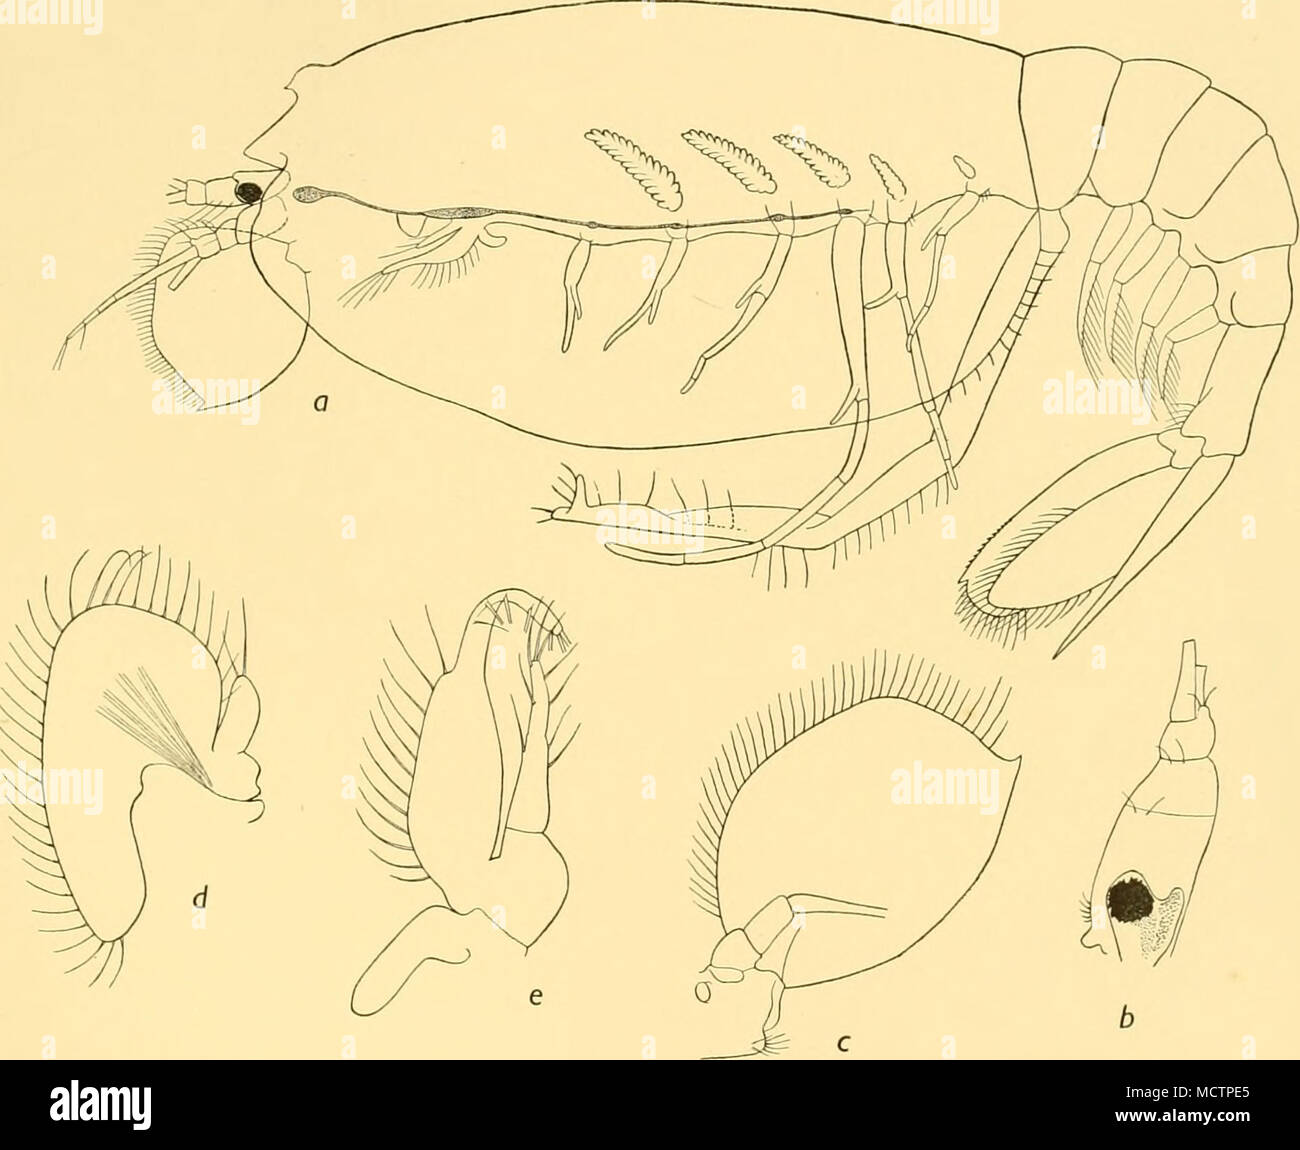 . Fig. 13. Amphionides valdiviae, Zimmer. a. Side view. d. Maxilla. b. Eye and antennule. e. Maxillipede i. c. Antenna. Zimmer expressed doubt as to whether the carapace was, in life, broad and flat or cylmdrical; but I feel fairly sure that it was not flattened dorso-ventrally. Posterior margin fringed with hairs; anteriorly with a blunt rostral prominence and a faint median dorsal ridge ending in front in a wedge-like elevation with a small spine in front. Stock Photo